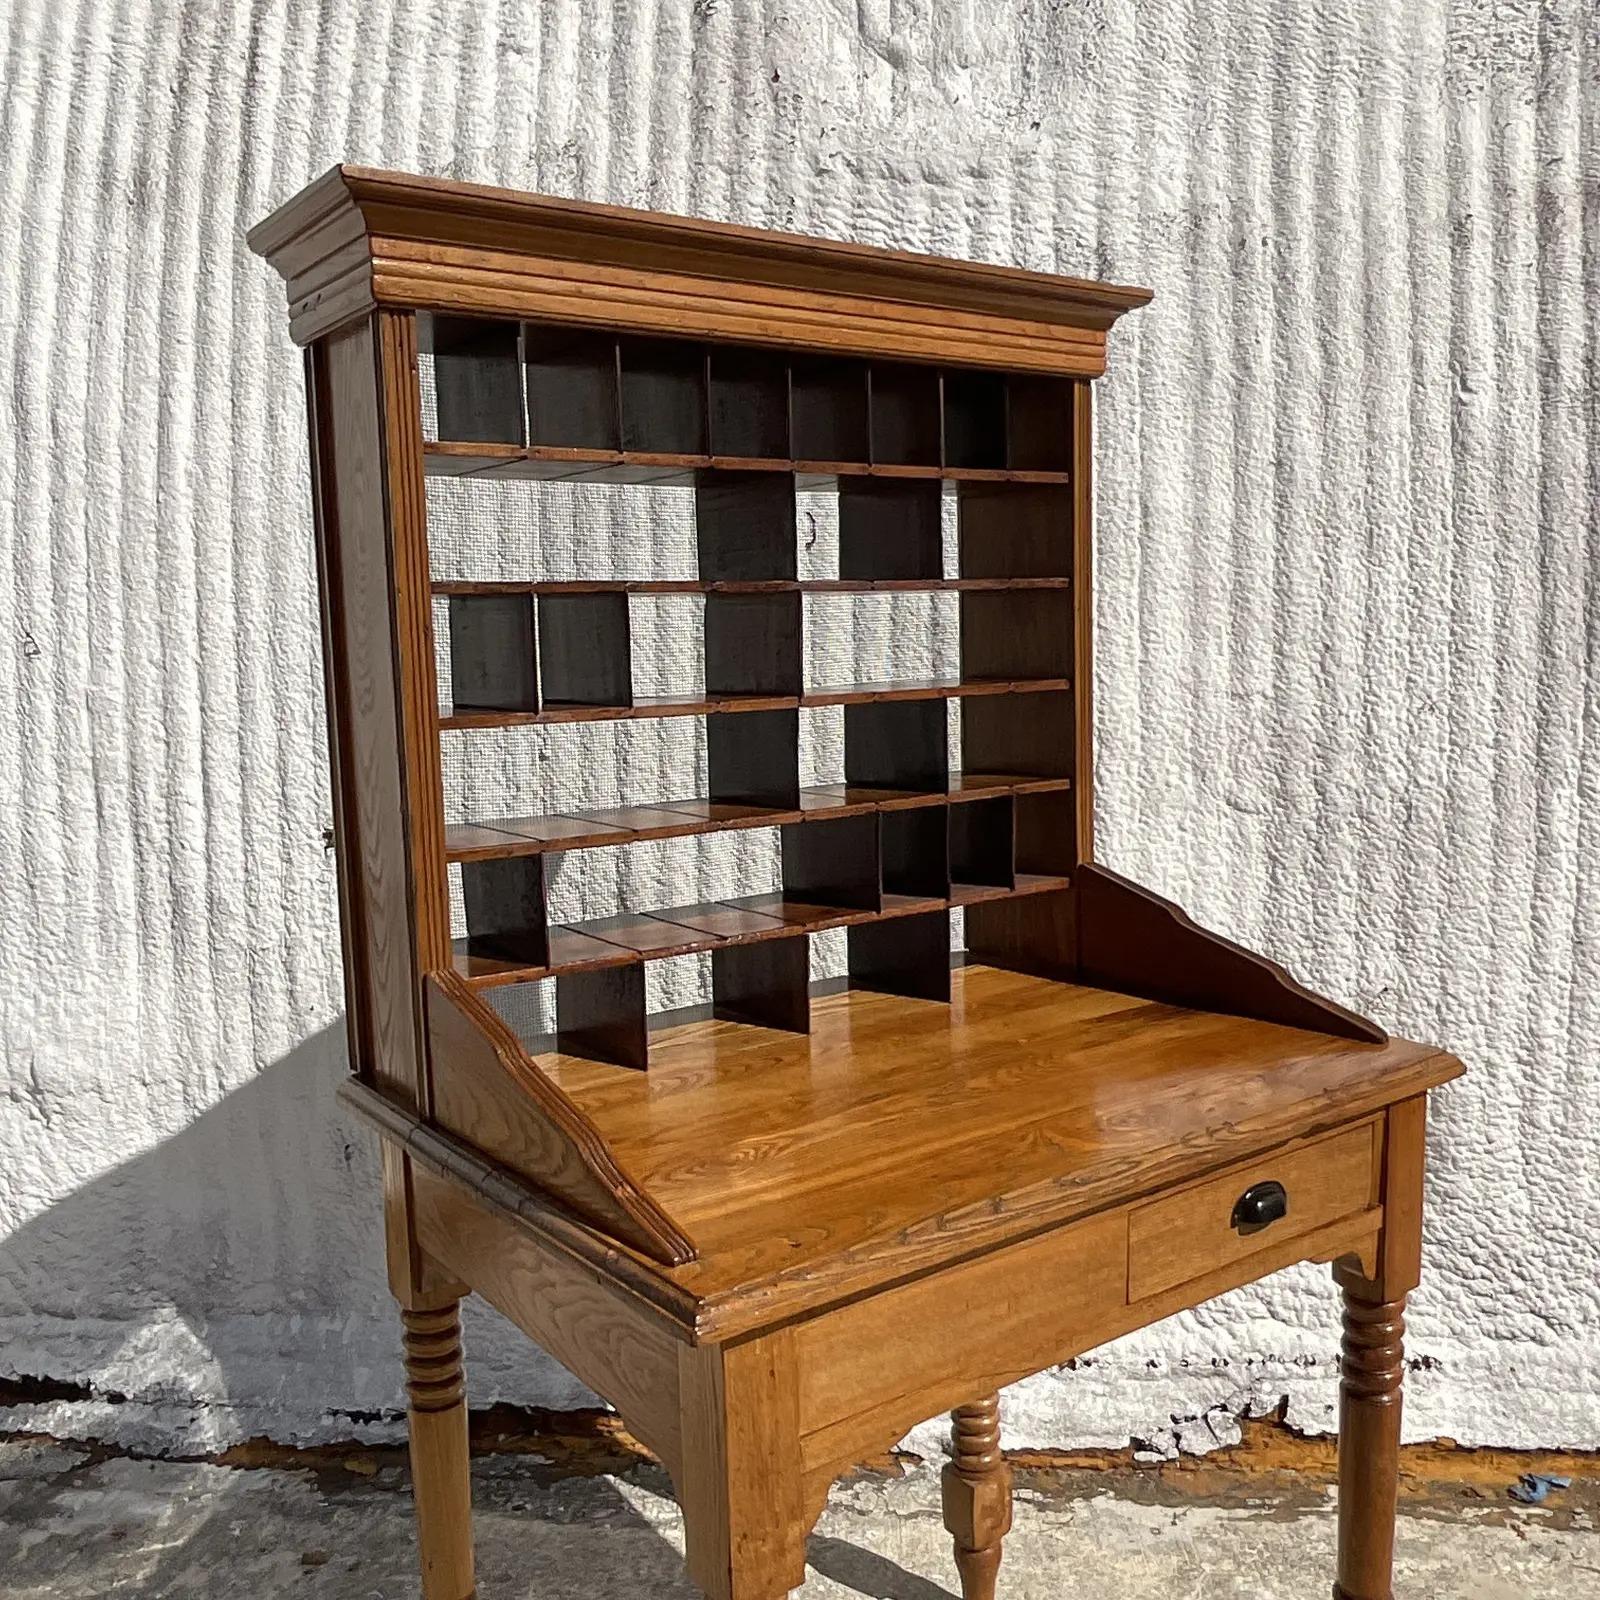 A fantastic vintage Boho PostMaster’s desk. A chic hand turned frame with a large upper cabinet. Perfect as a writing desk, small hotel check in or collectors cabinet. The charm is endless. You can move around the small partitions to create larger